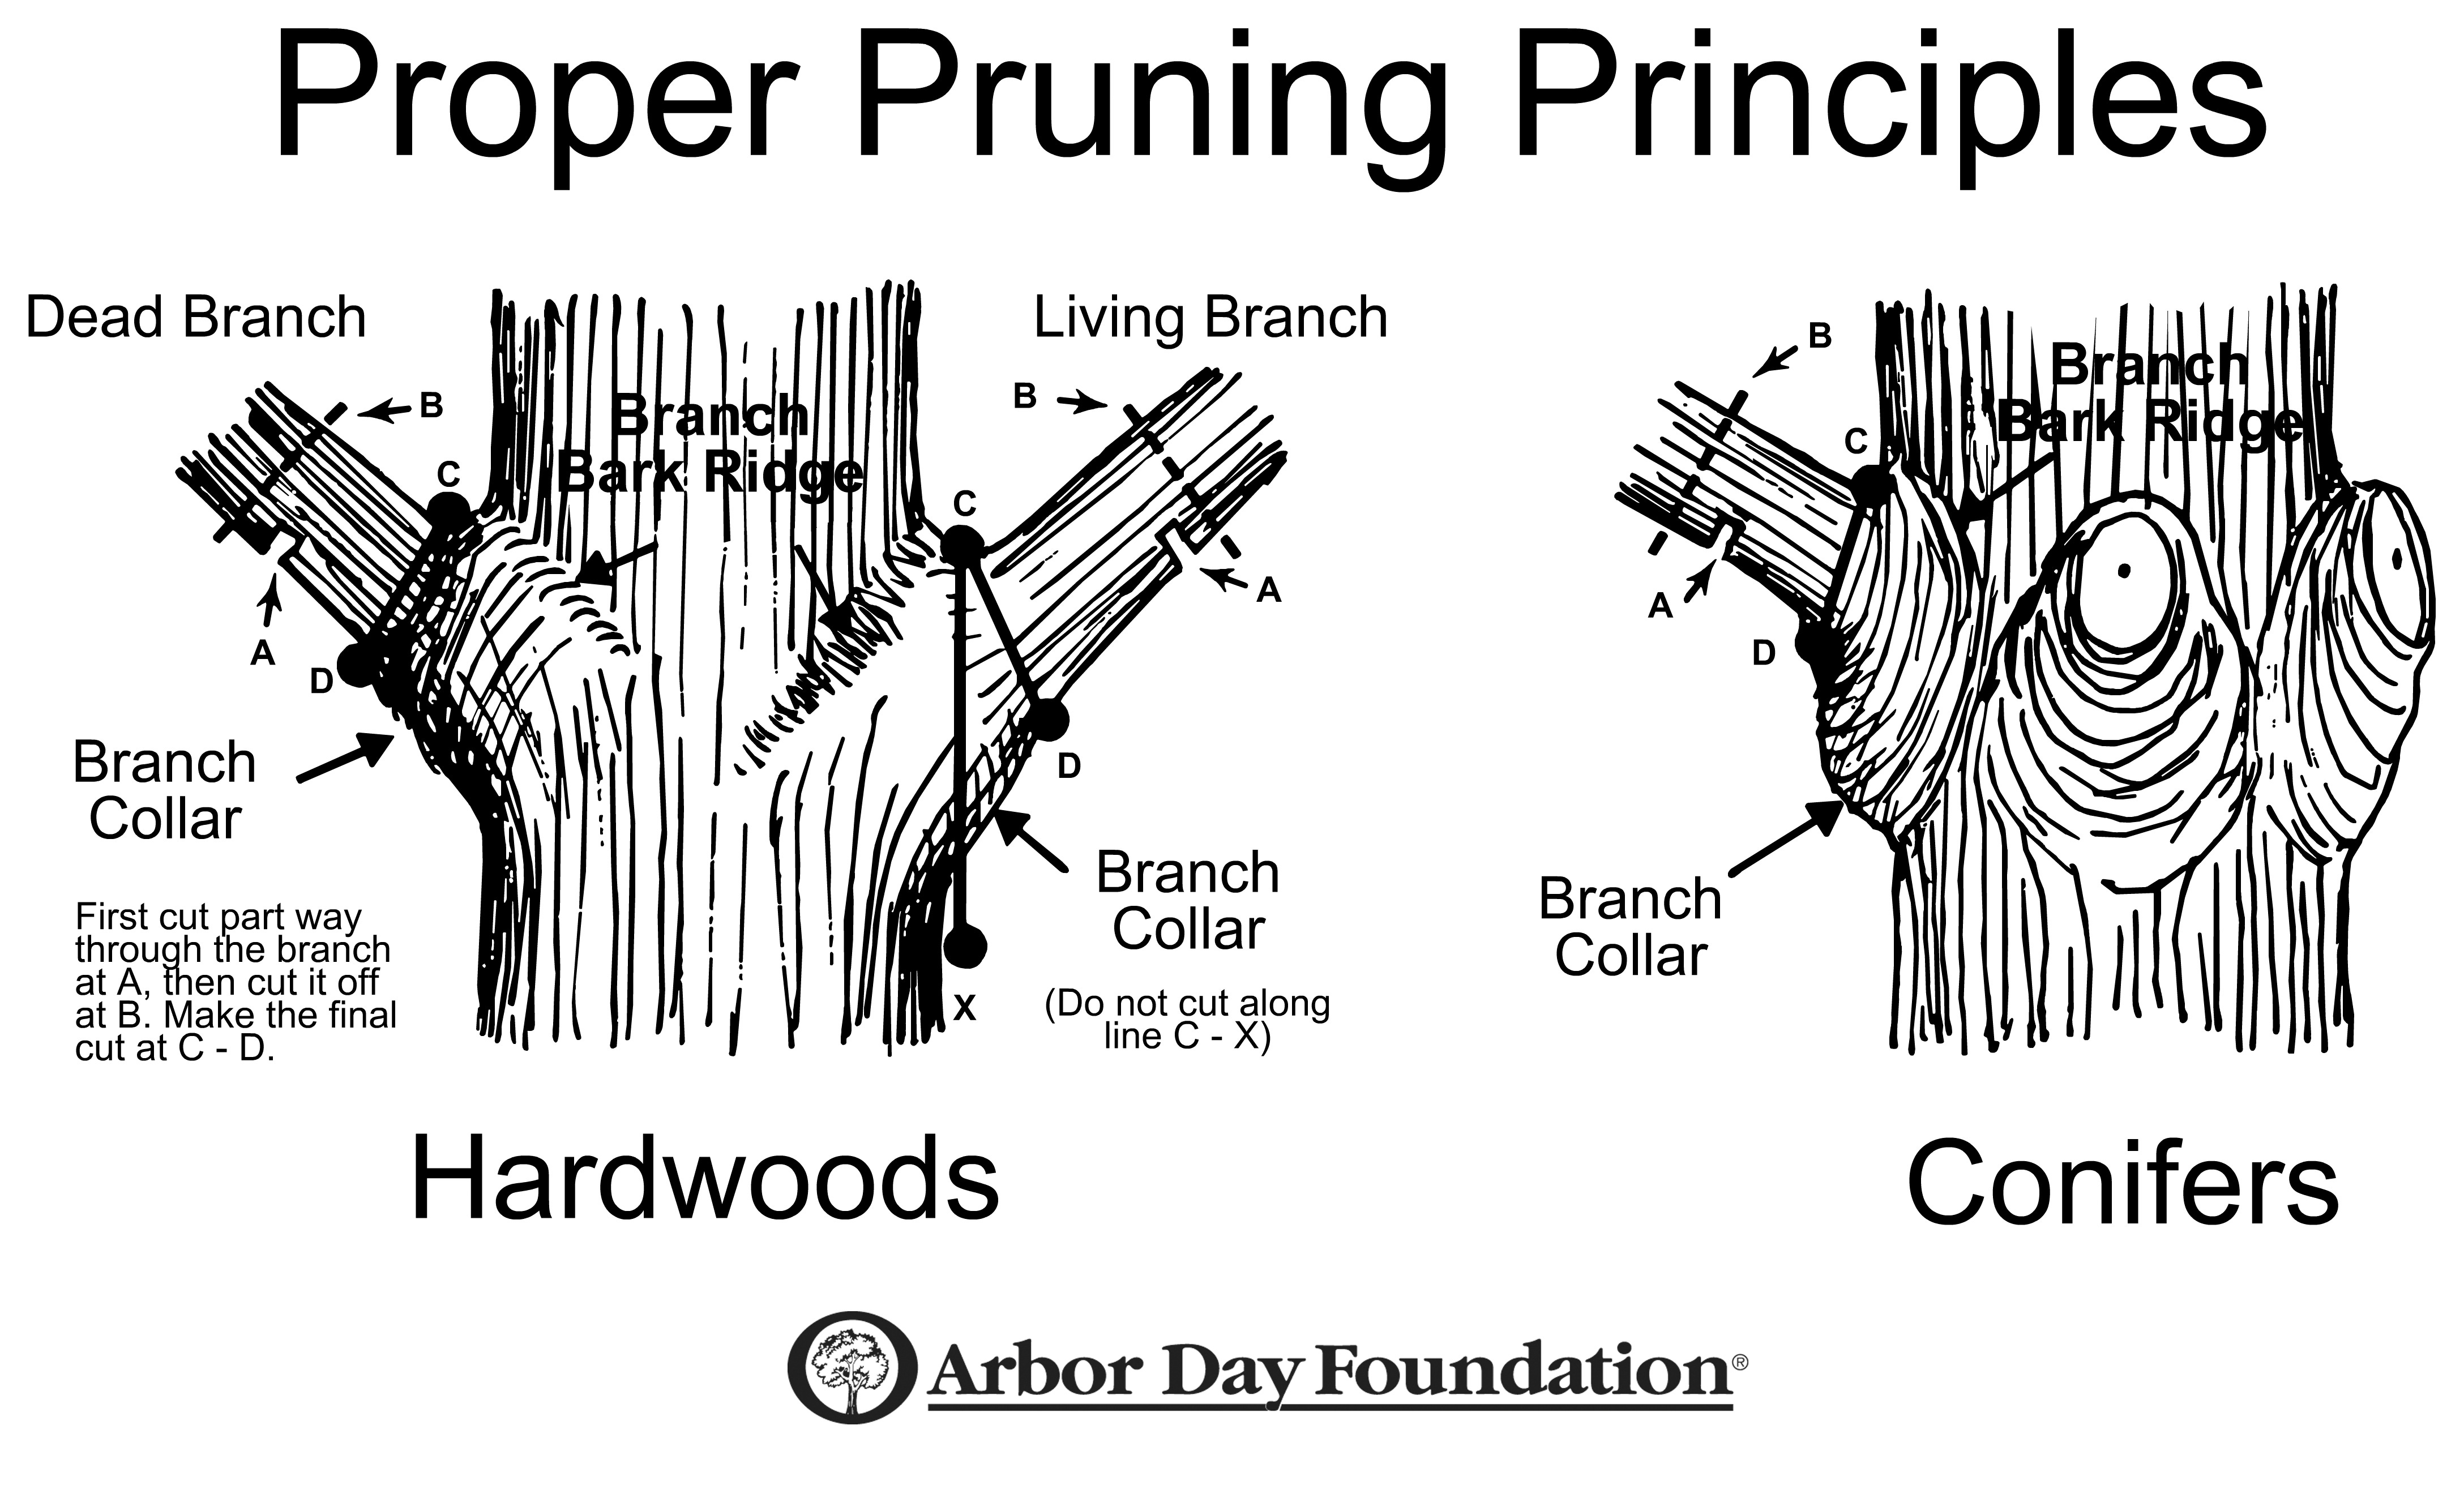 Winter Pruning: When and Why - Tree Topics